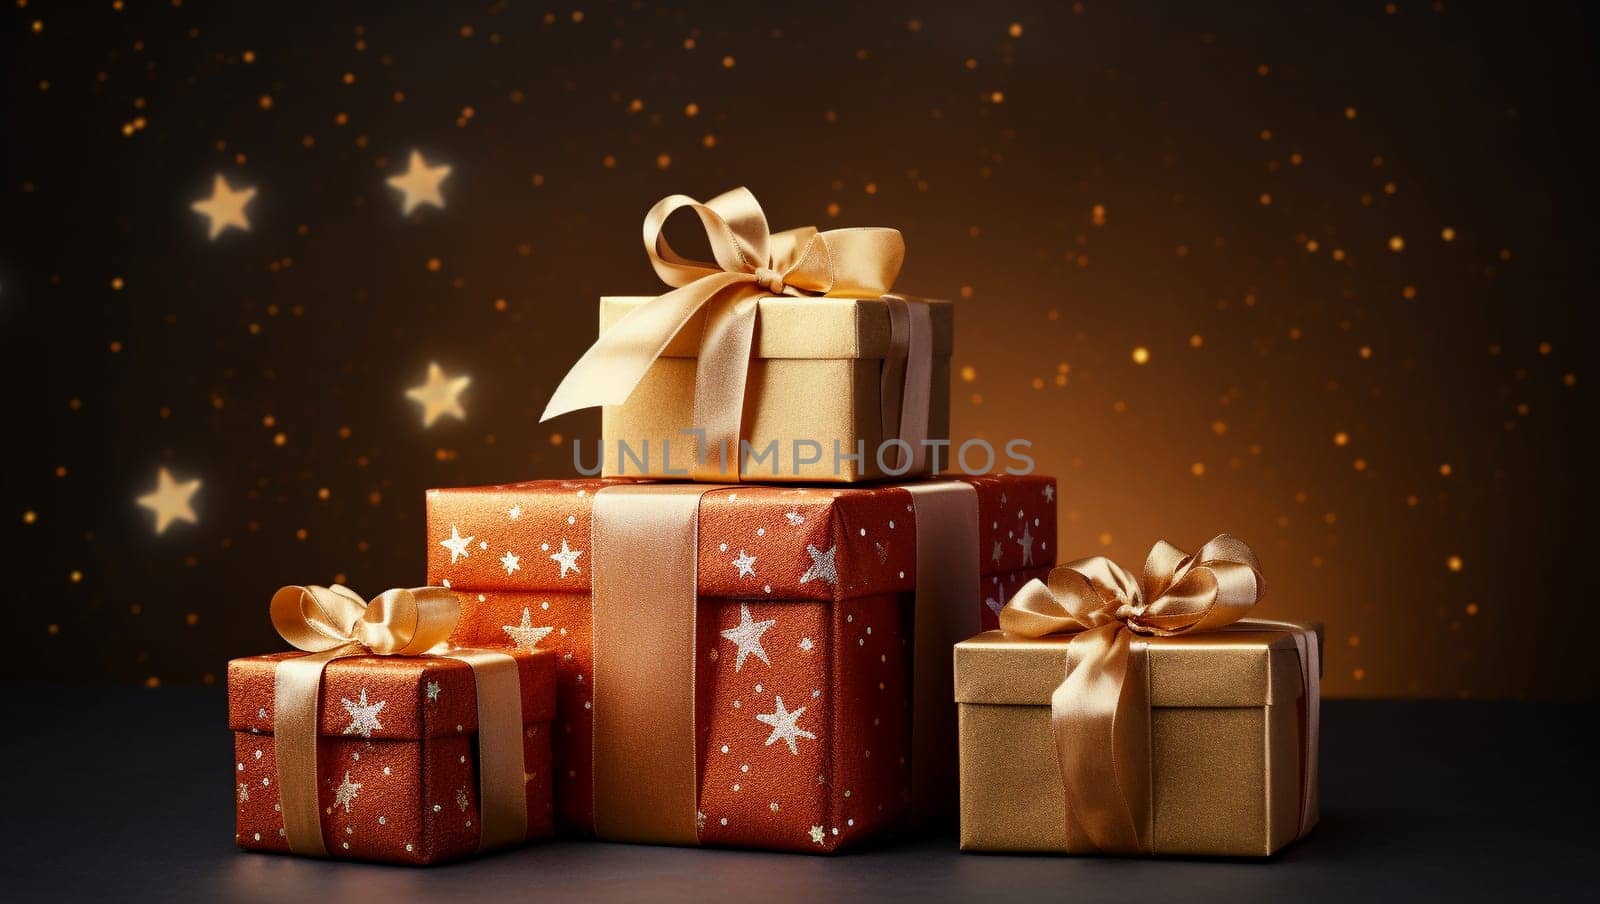 Gifts for the New Year. Christmas and New Year background. Gift boxes and pine cones for holiday. High quality illustration